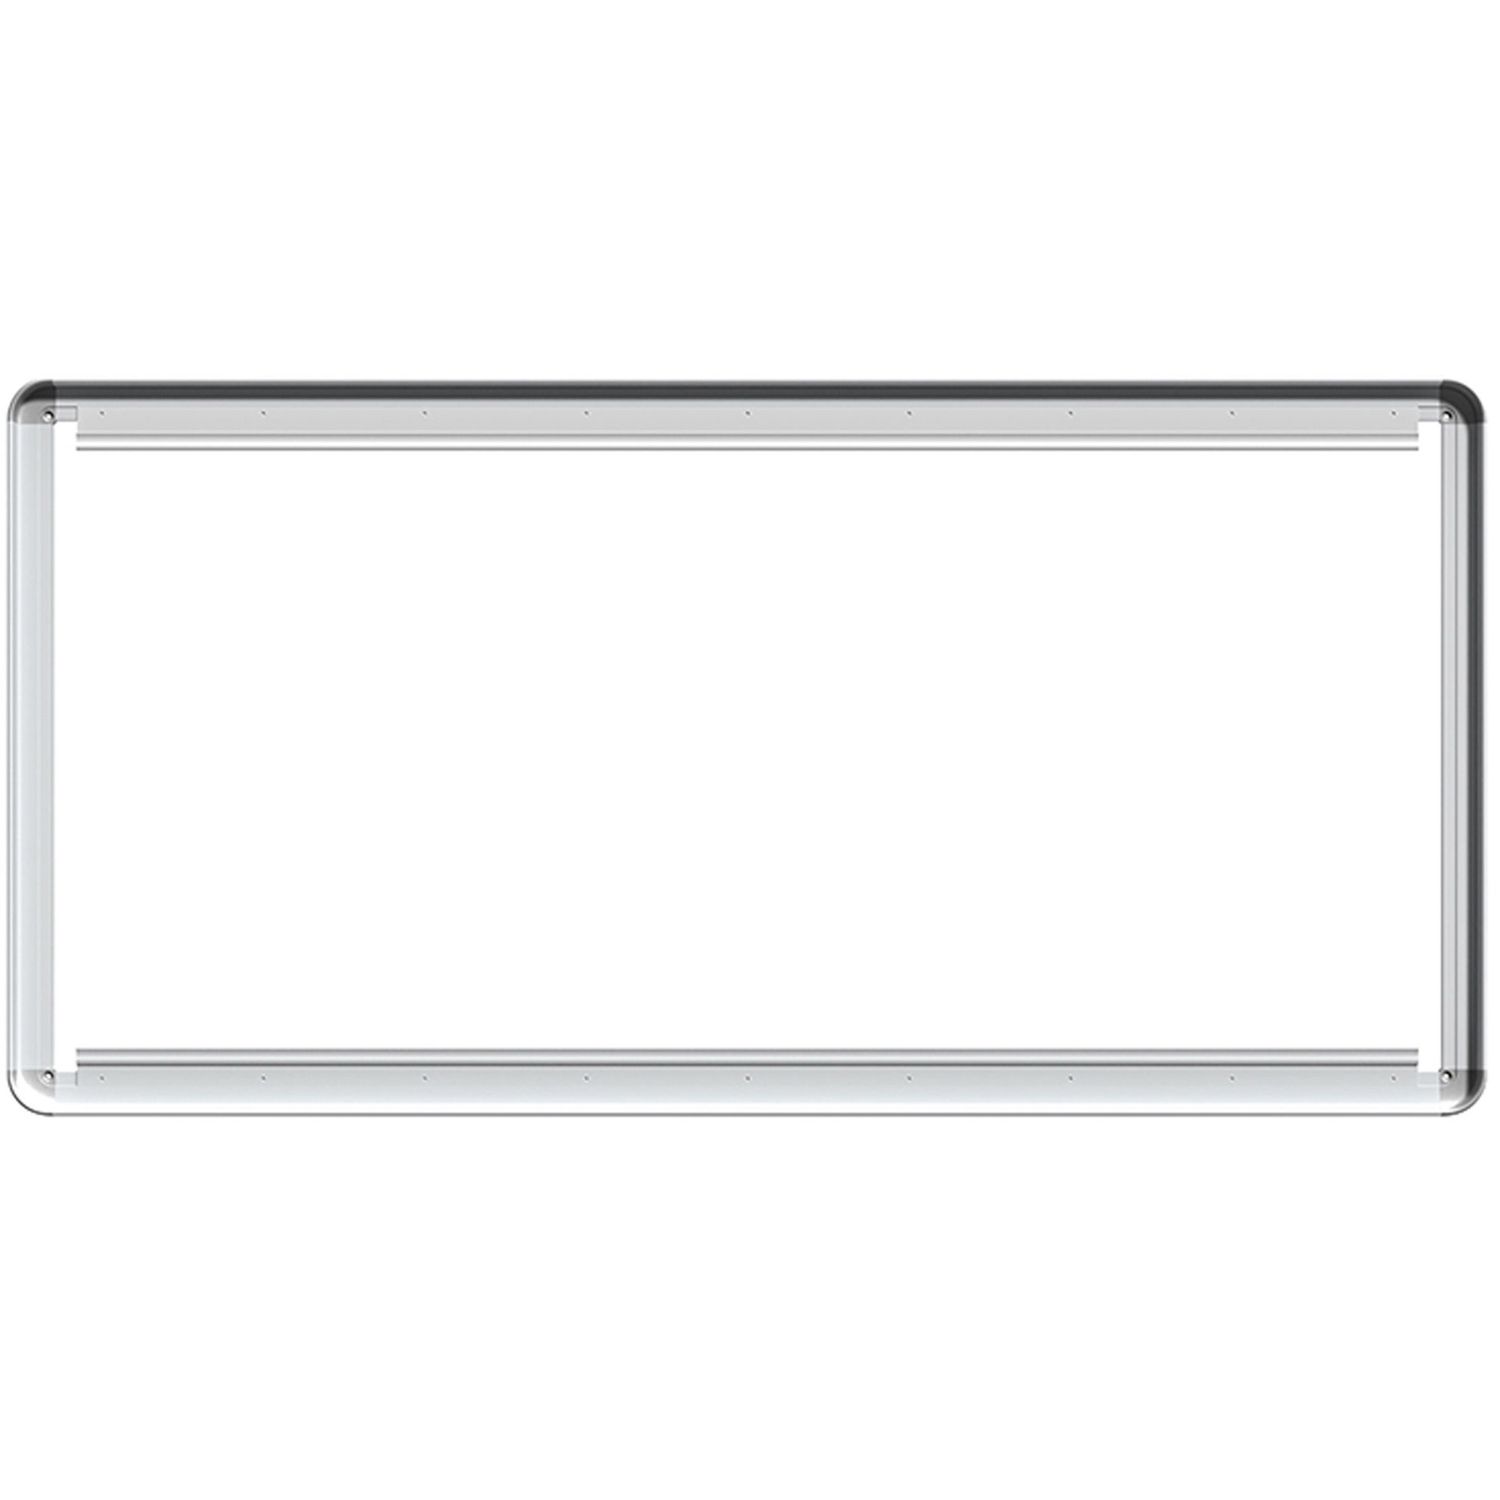 Mounting Frame for Whiteboard - Silver 1 Each